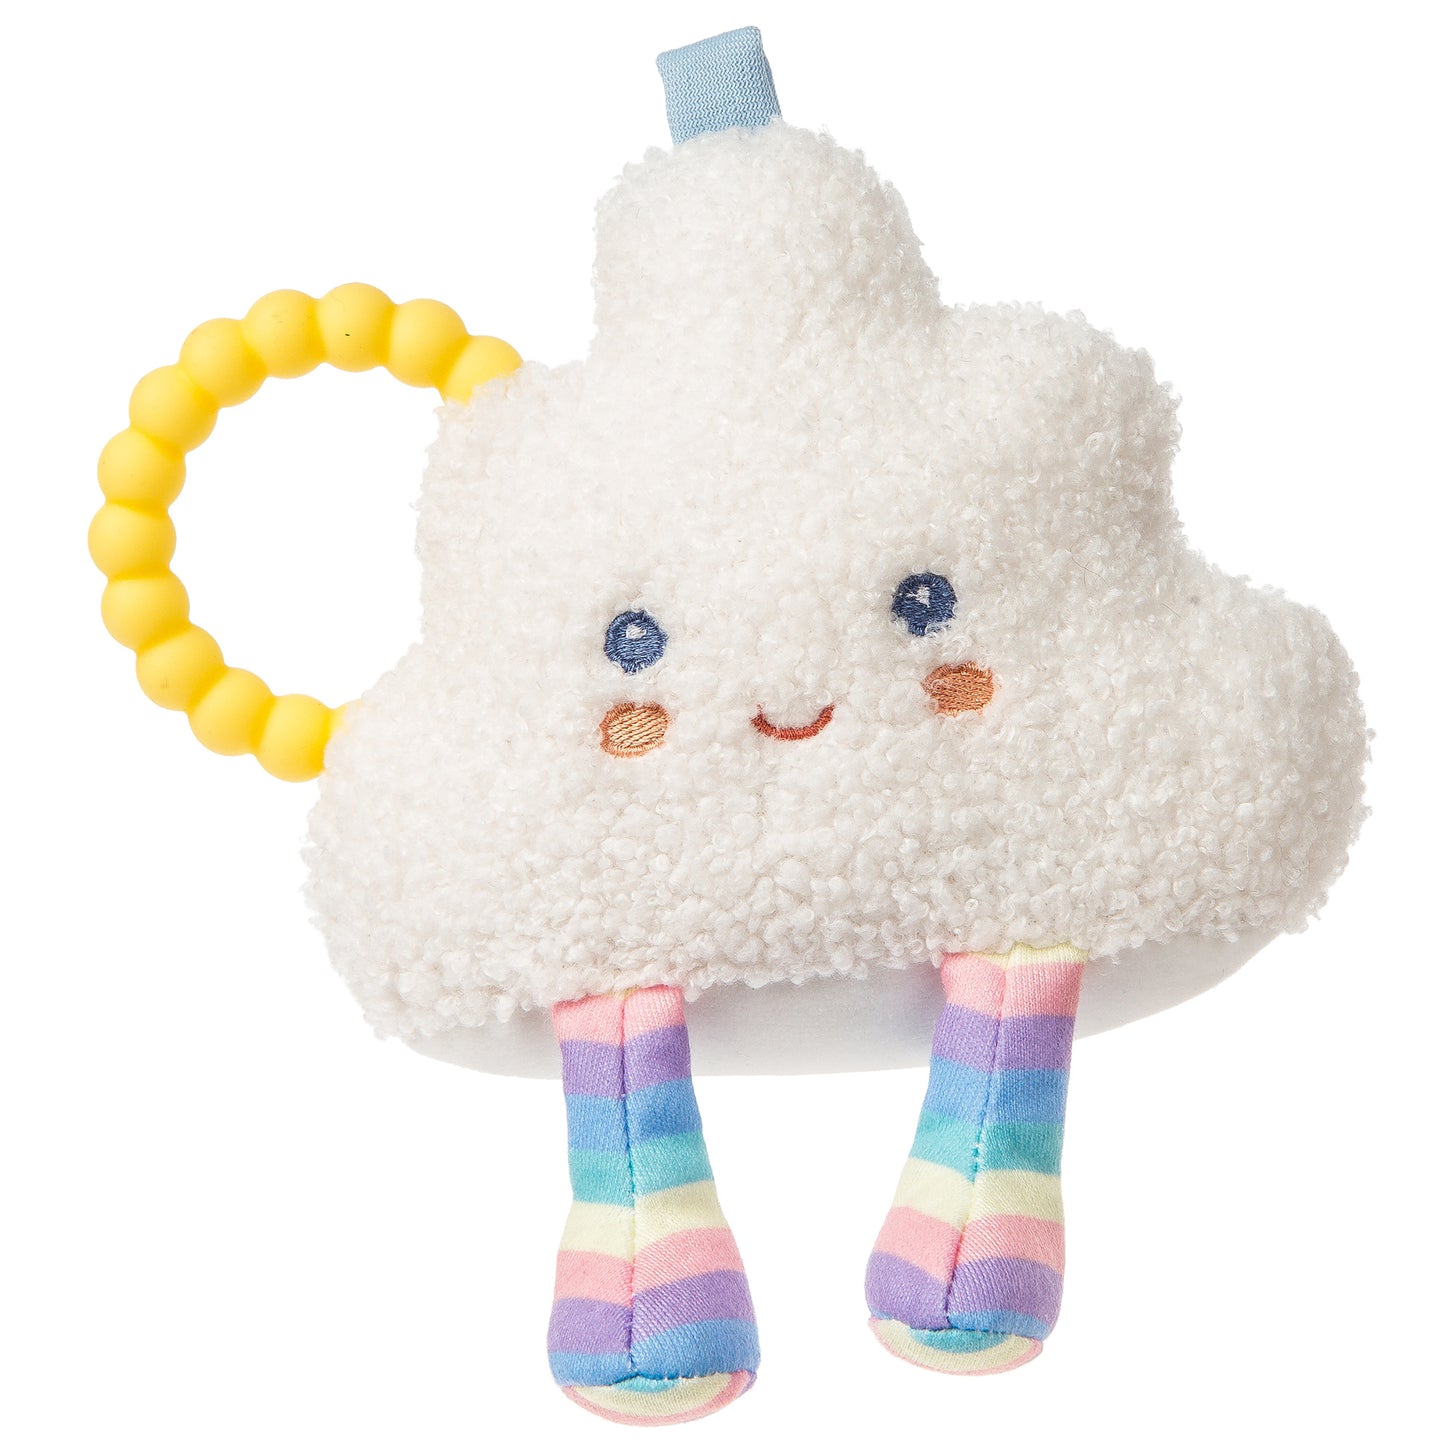 Baby's Teether Rattle in Rainbow Puffy Cloud - 6"